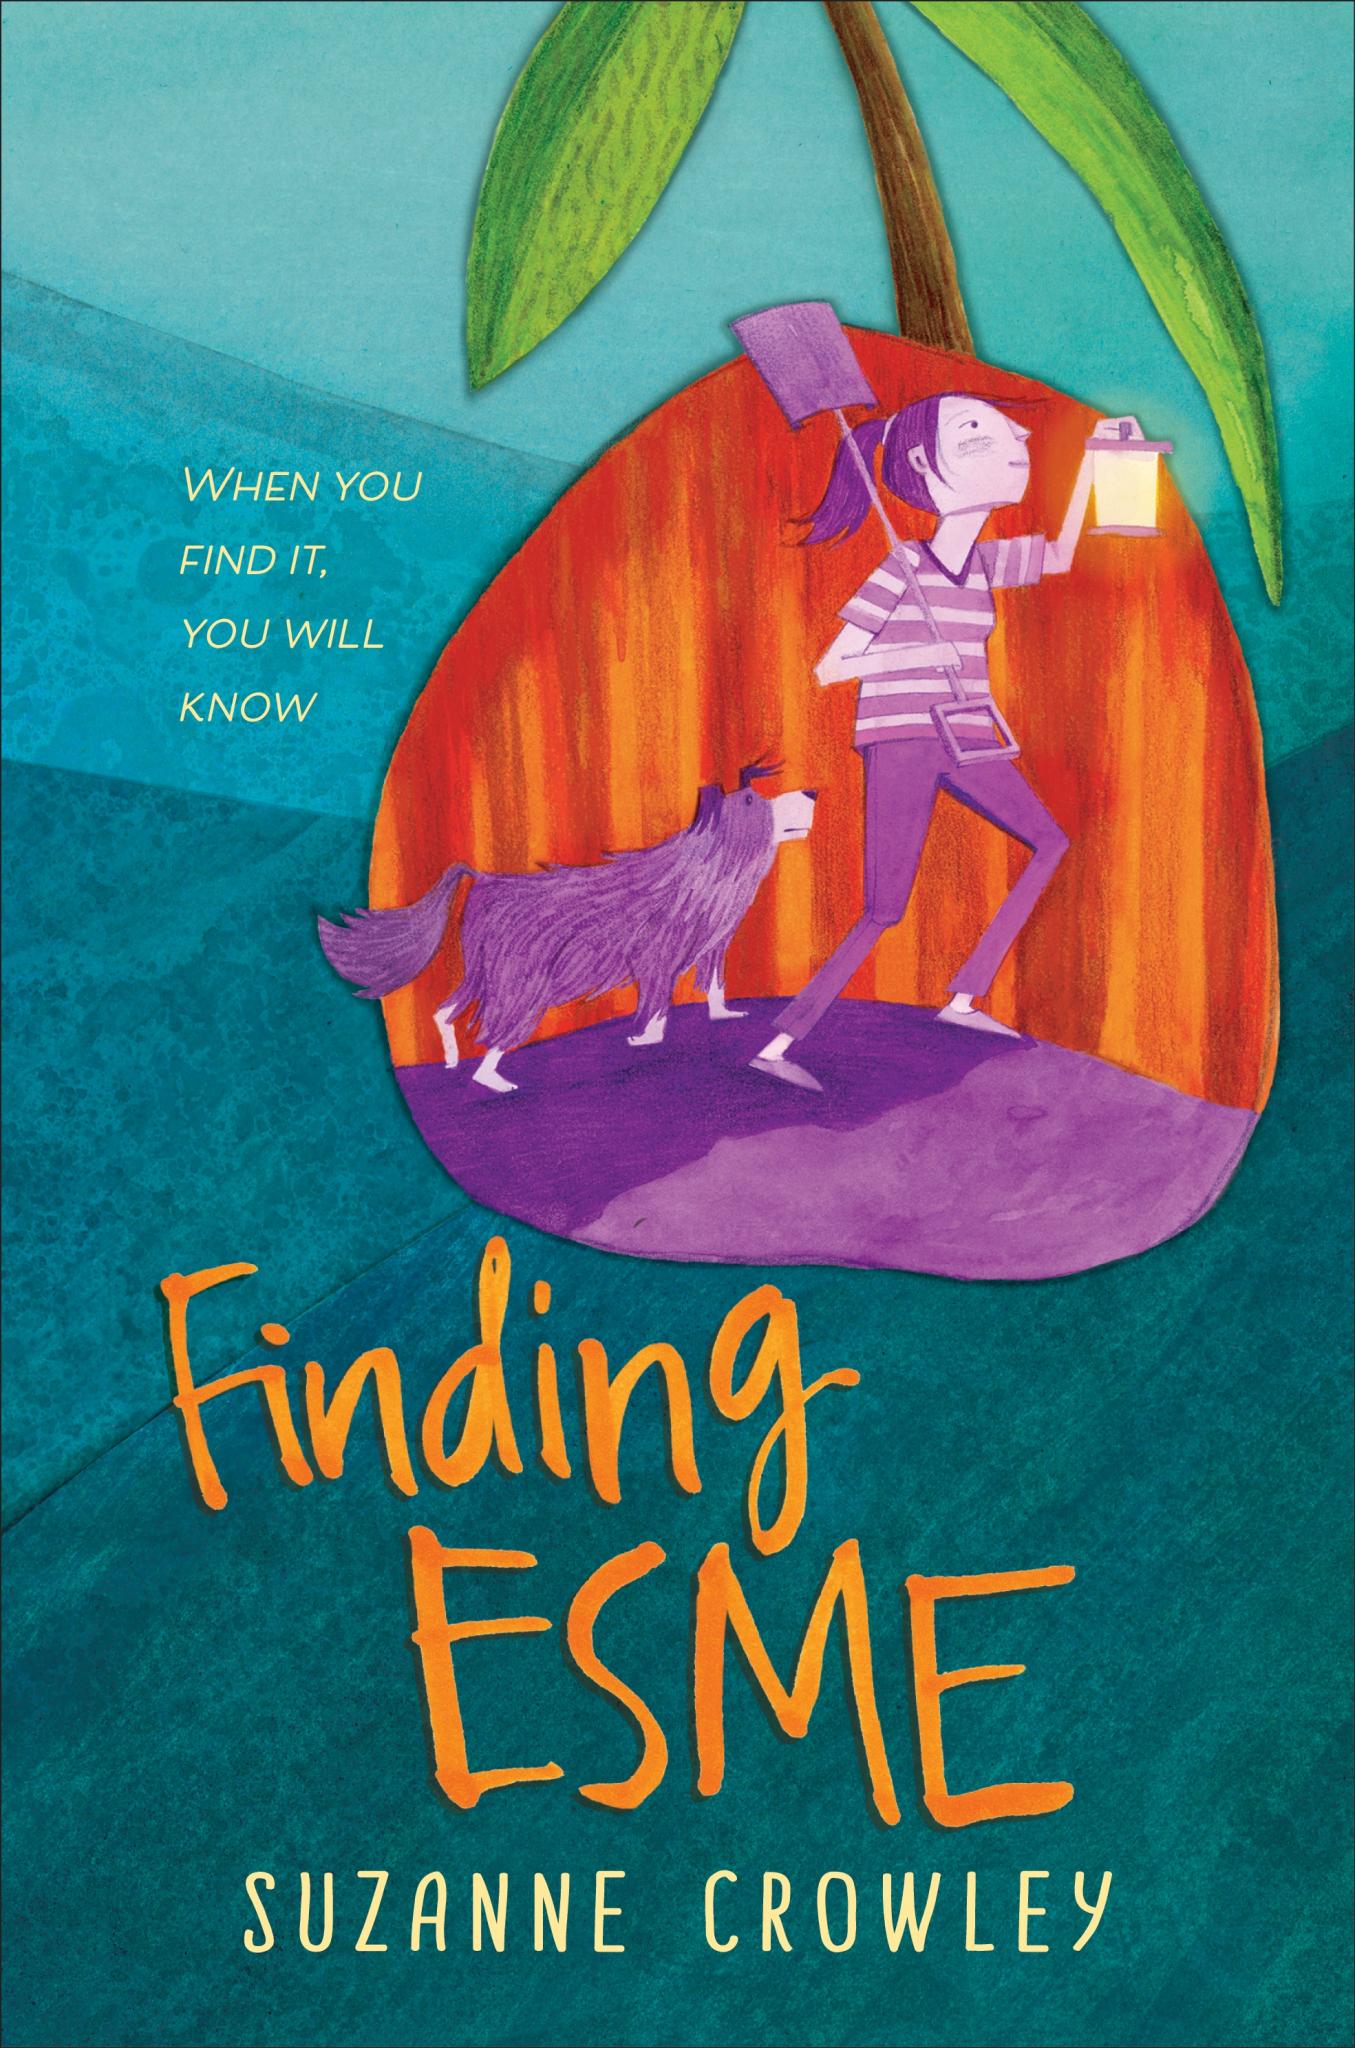 Finding Esme by Suzanne Crowley